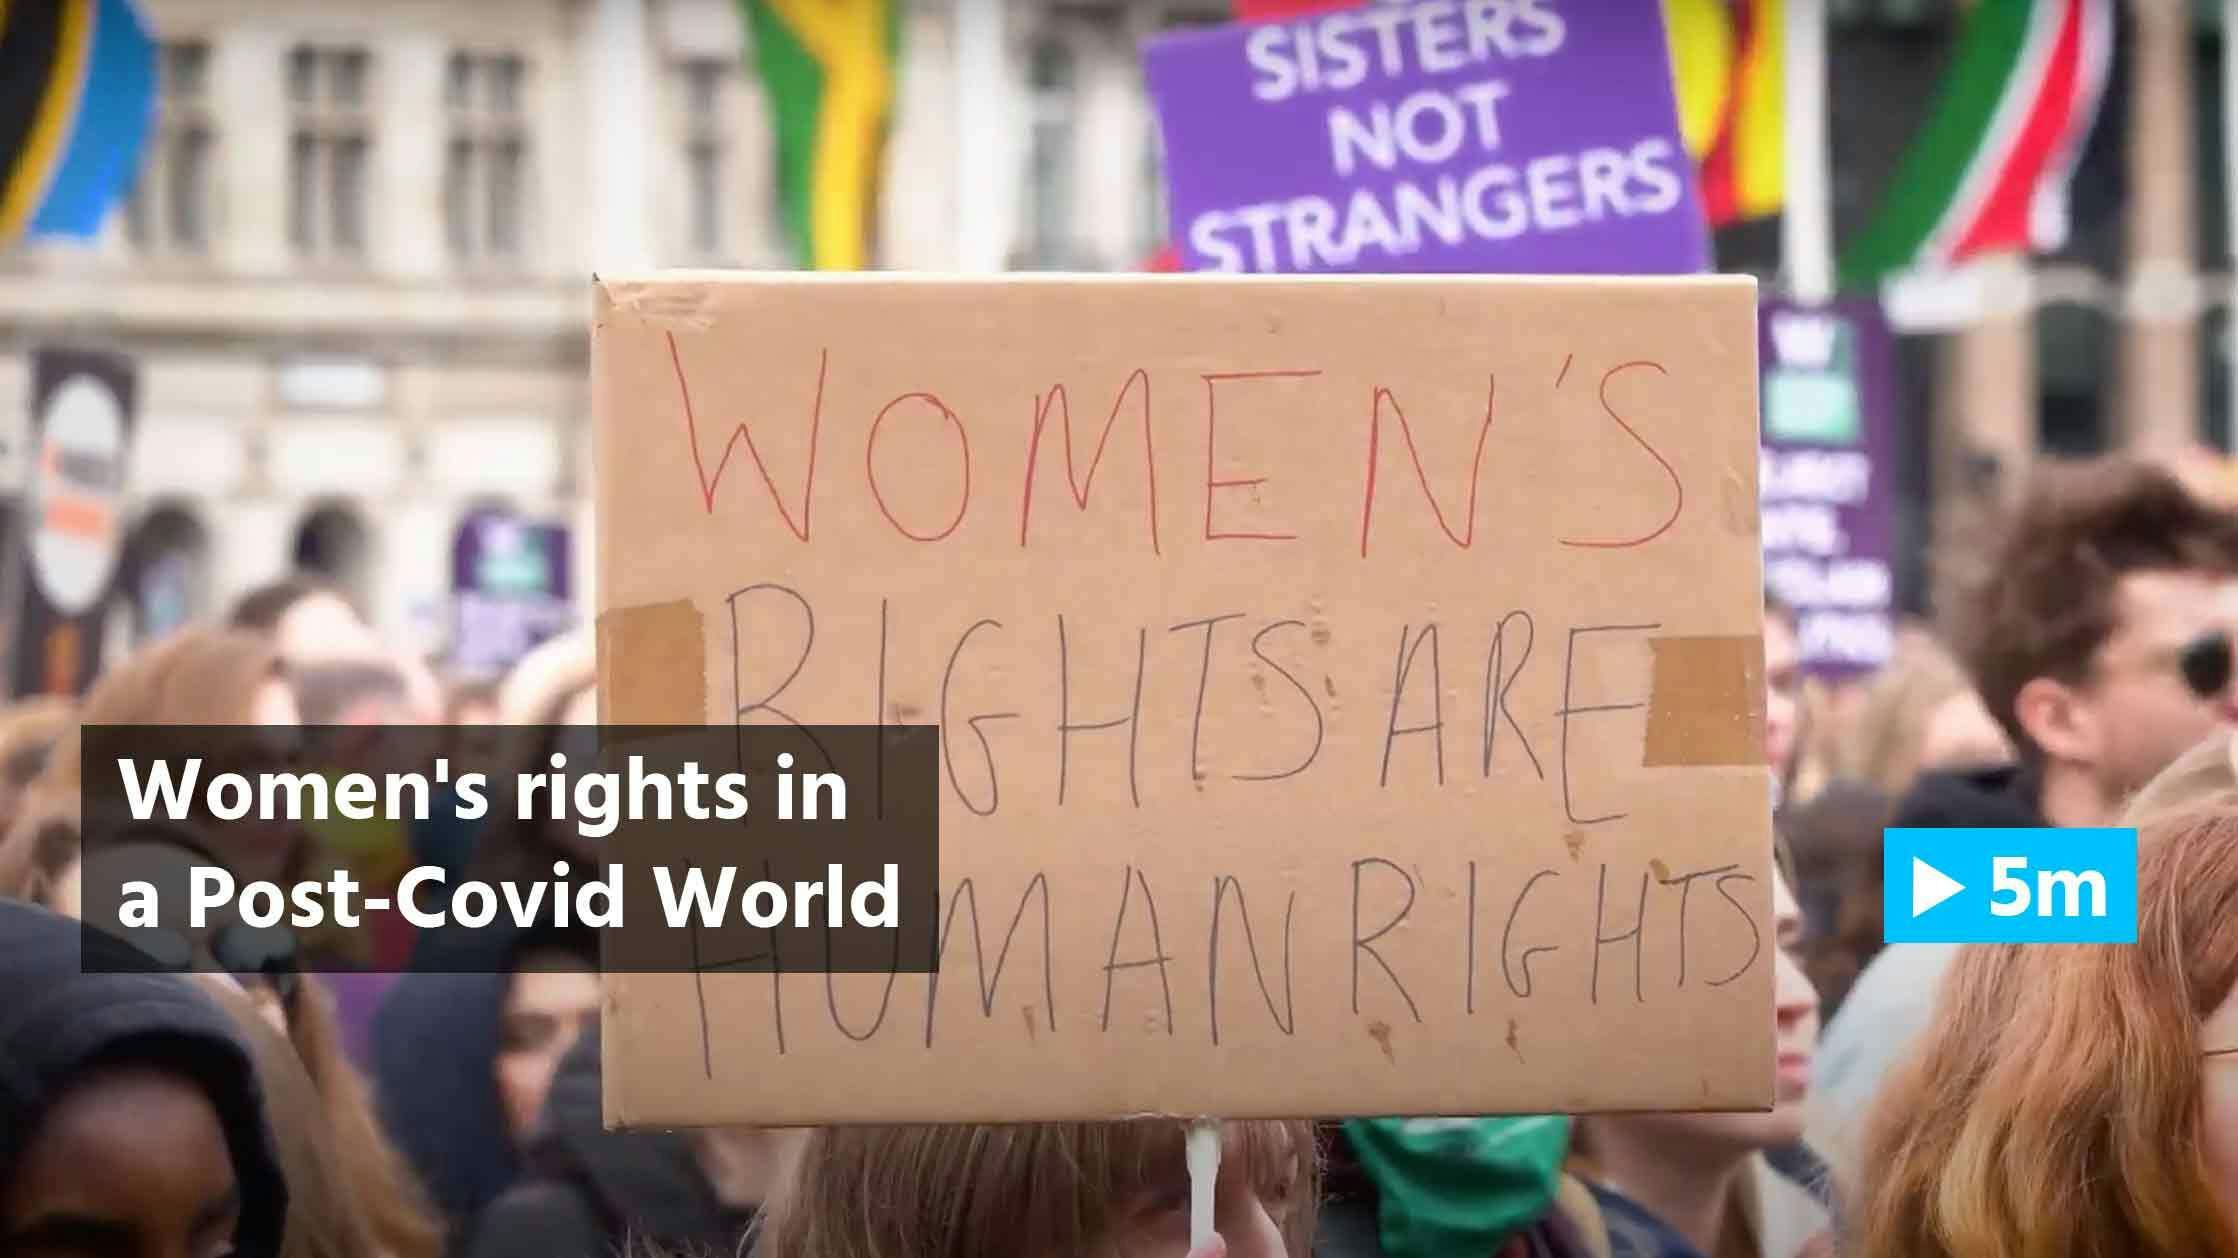 Reuters Report: Women's rights in a post-Covid world